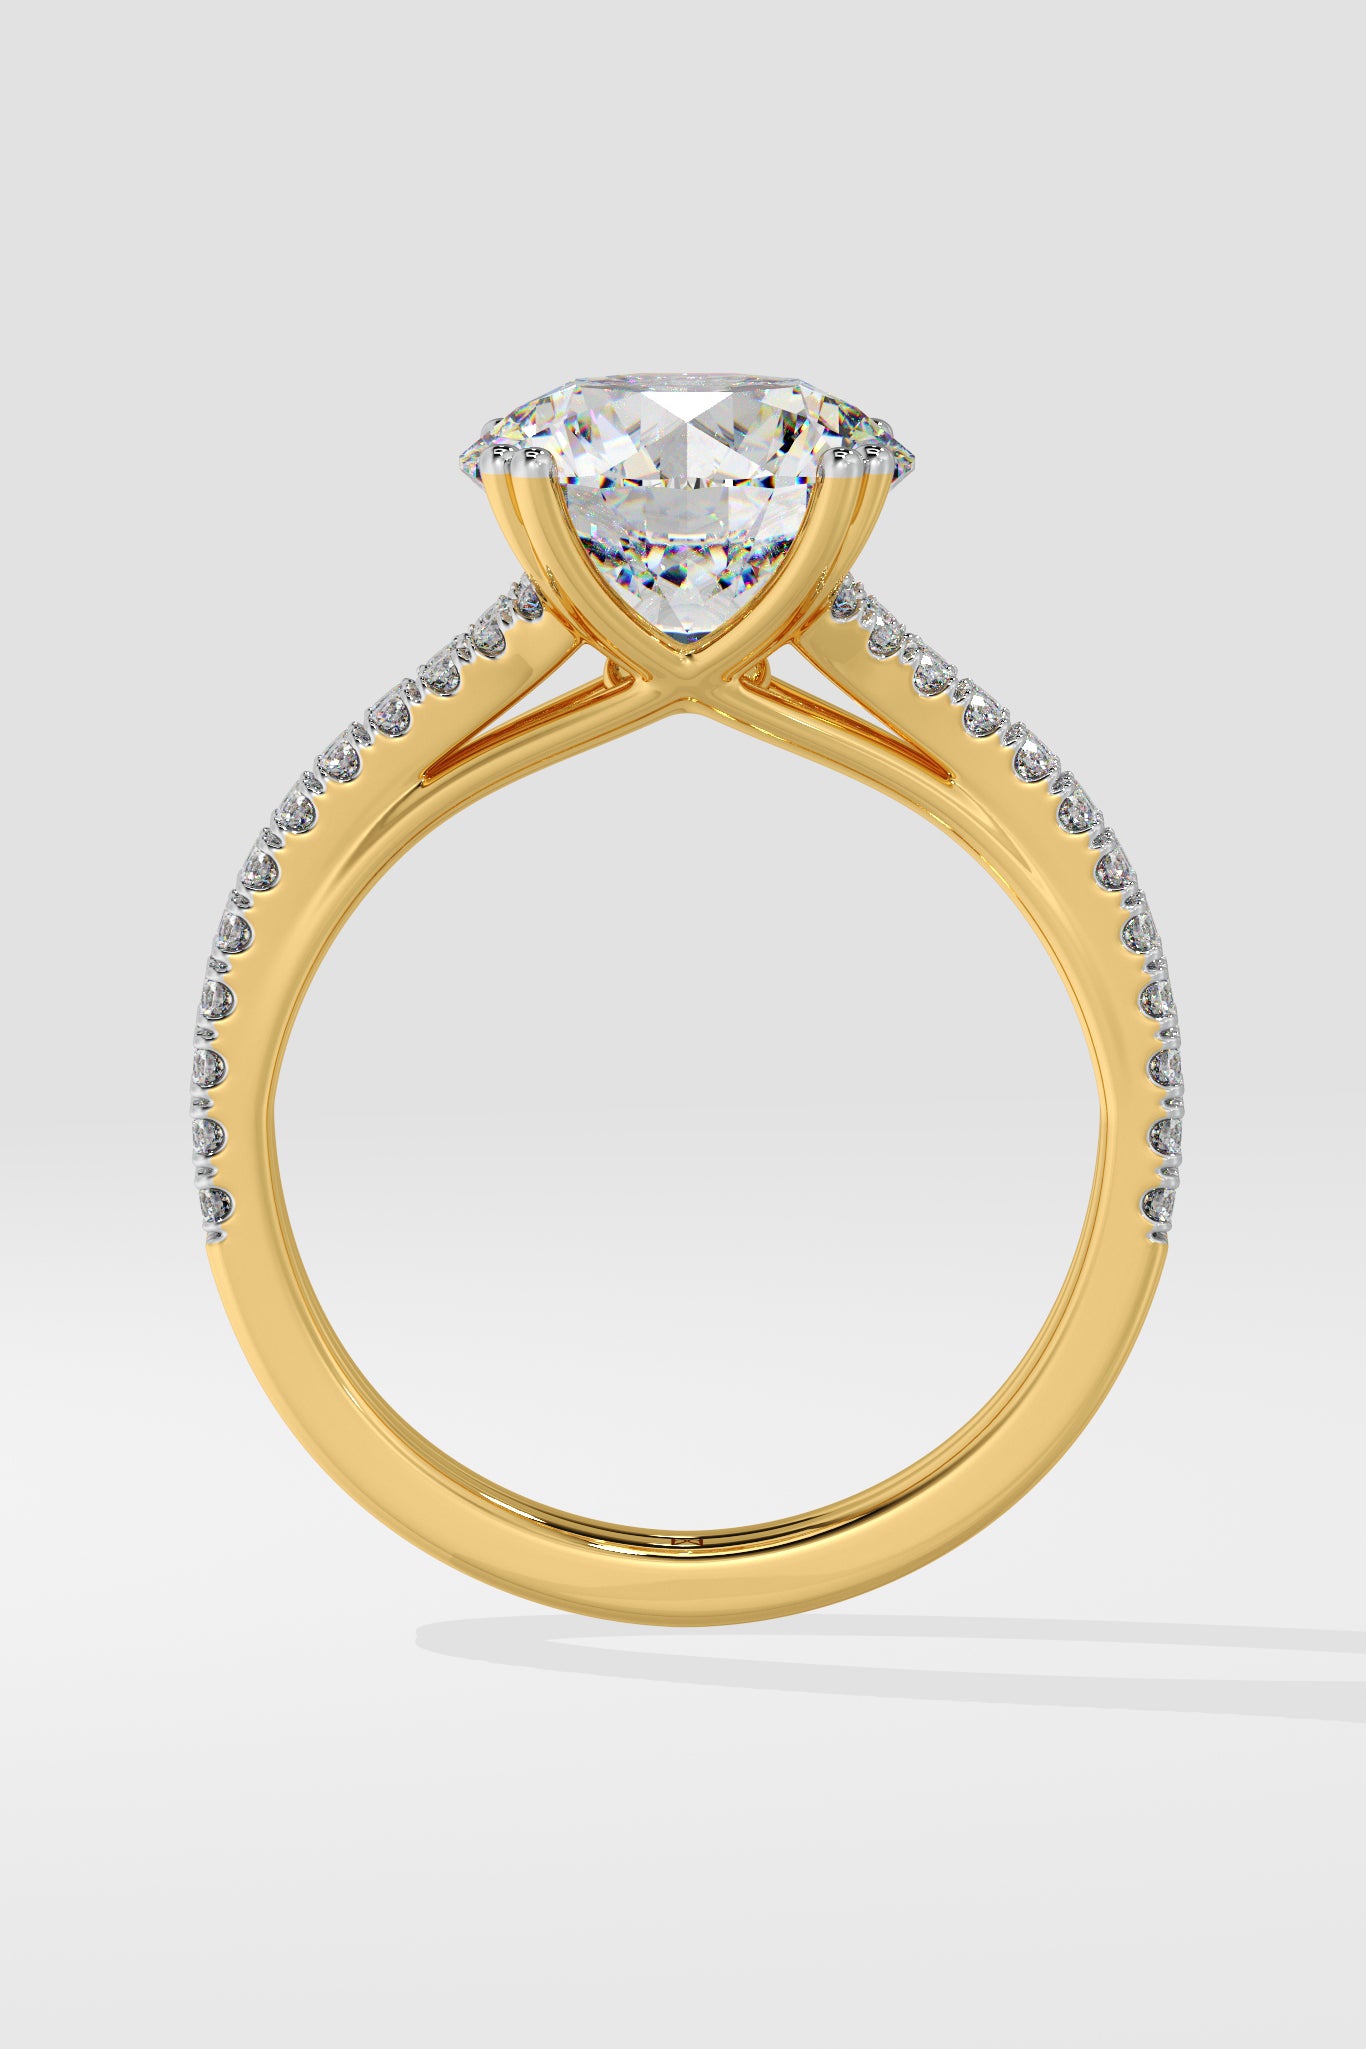 3 ct Dulce Solitaire Ring